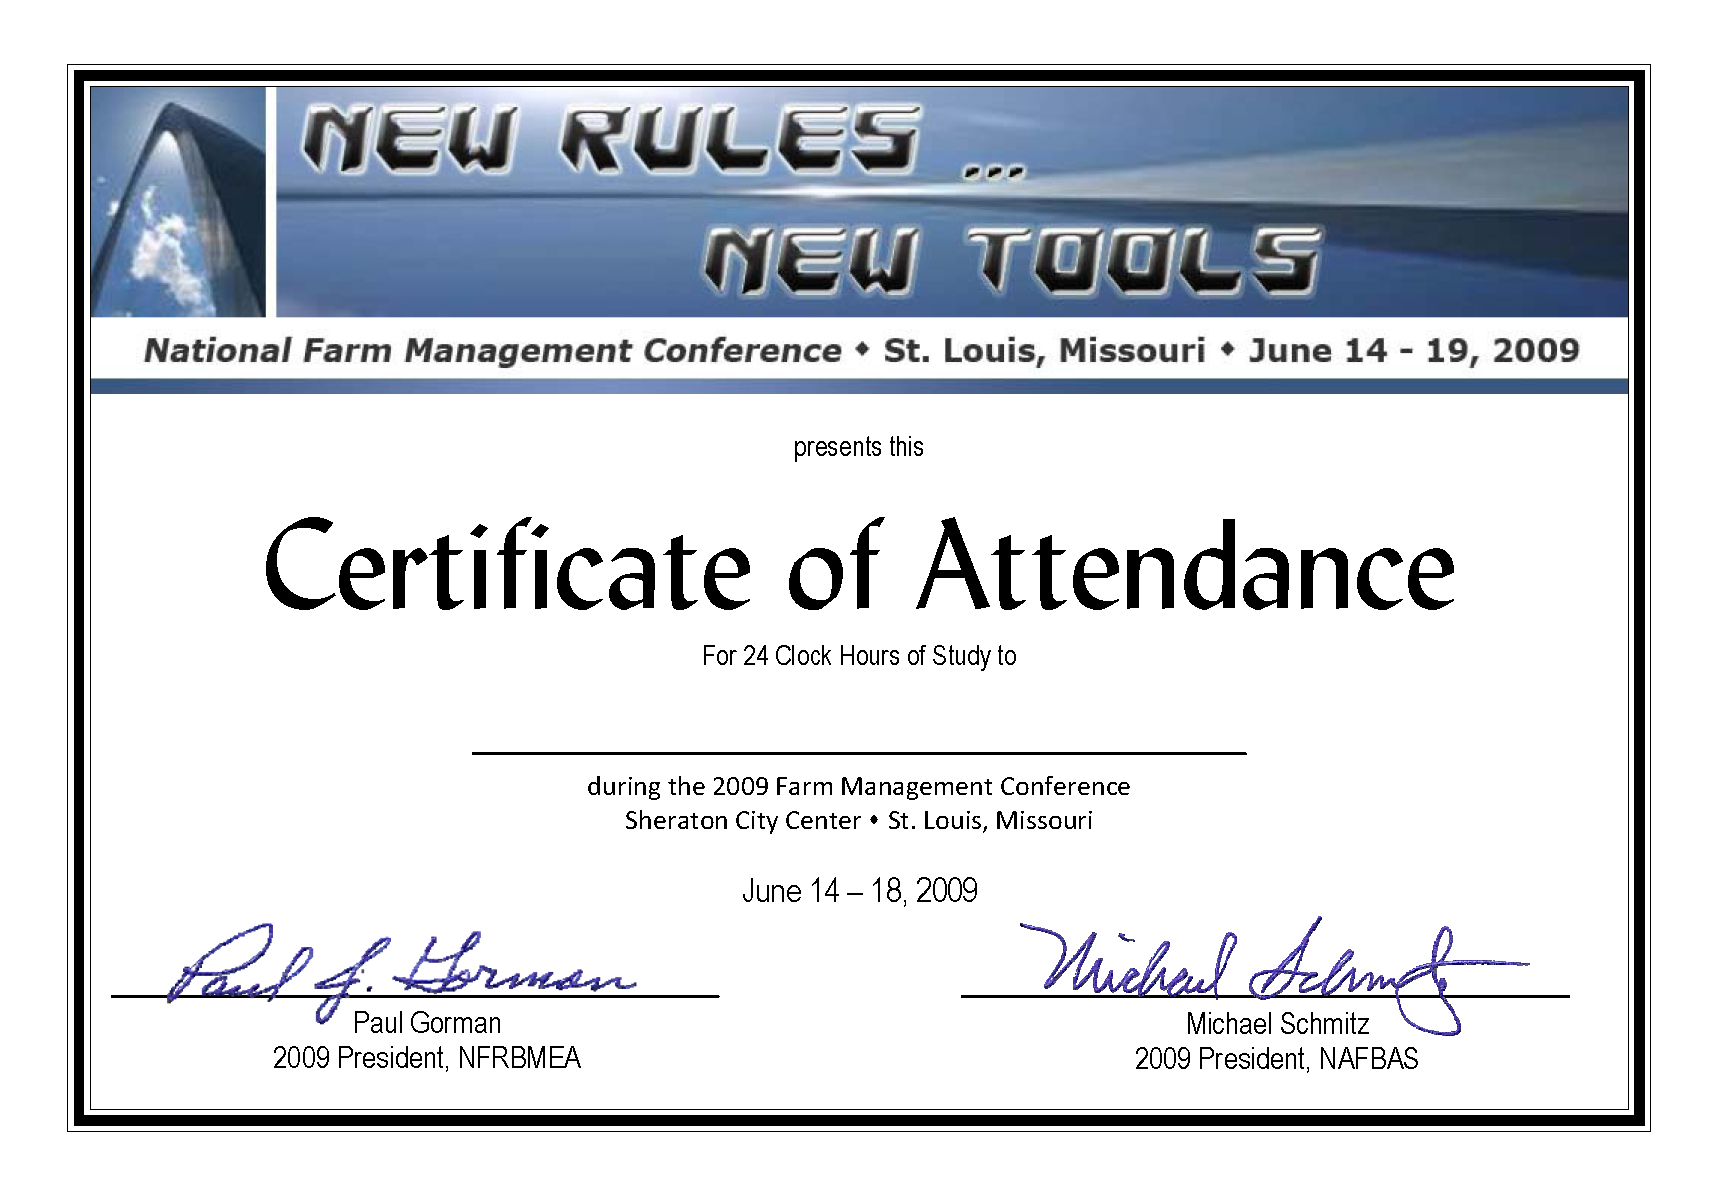 Conference Certificate Of Attendance Template - Great For Certificate Of Attendance Conference Template